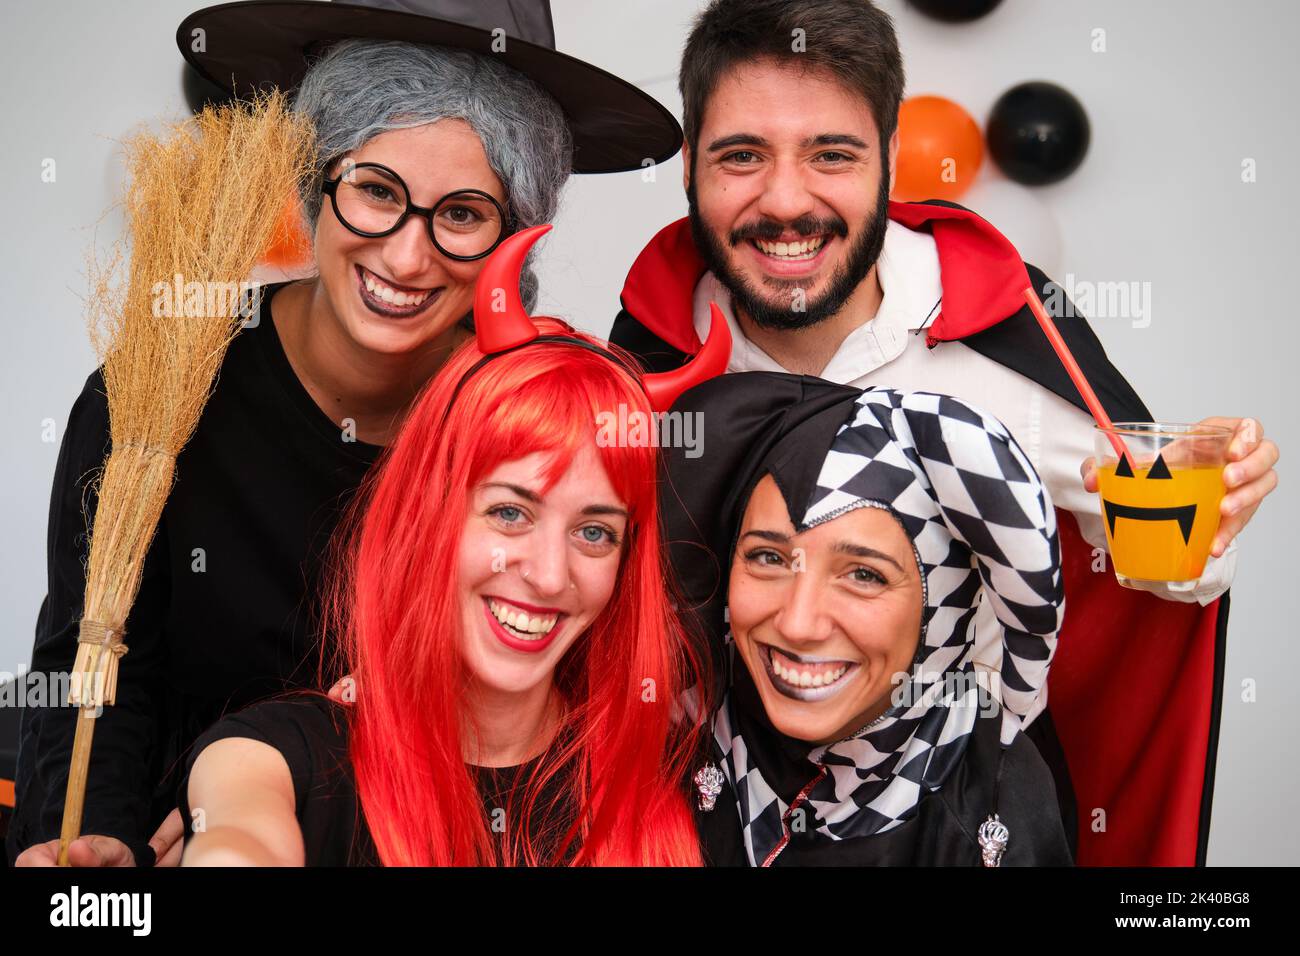 Four people taking a selfie photo at a costume Halloween party. Stock Photo